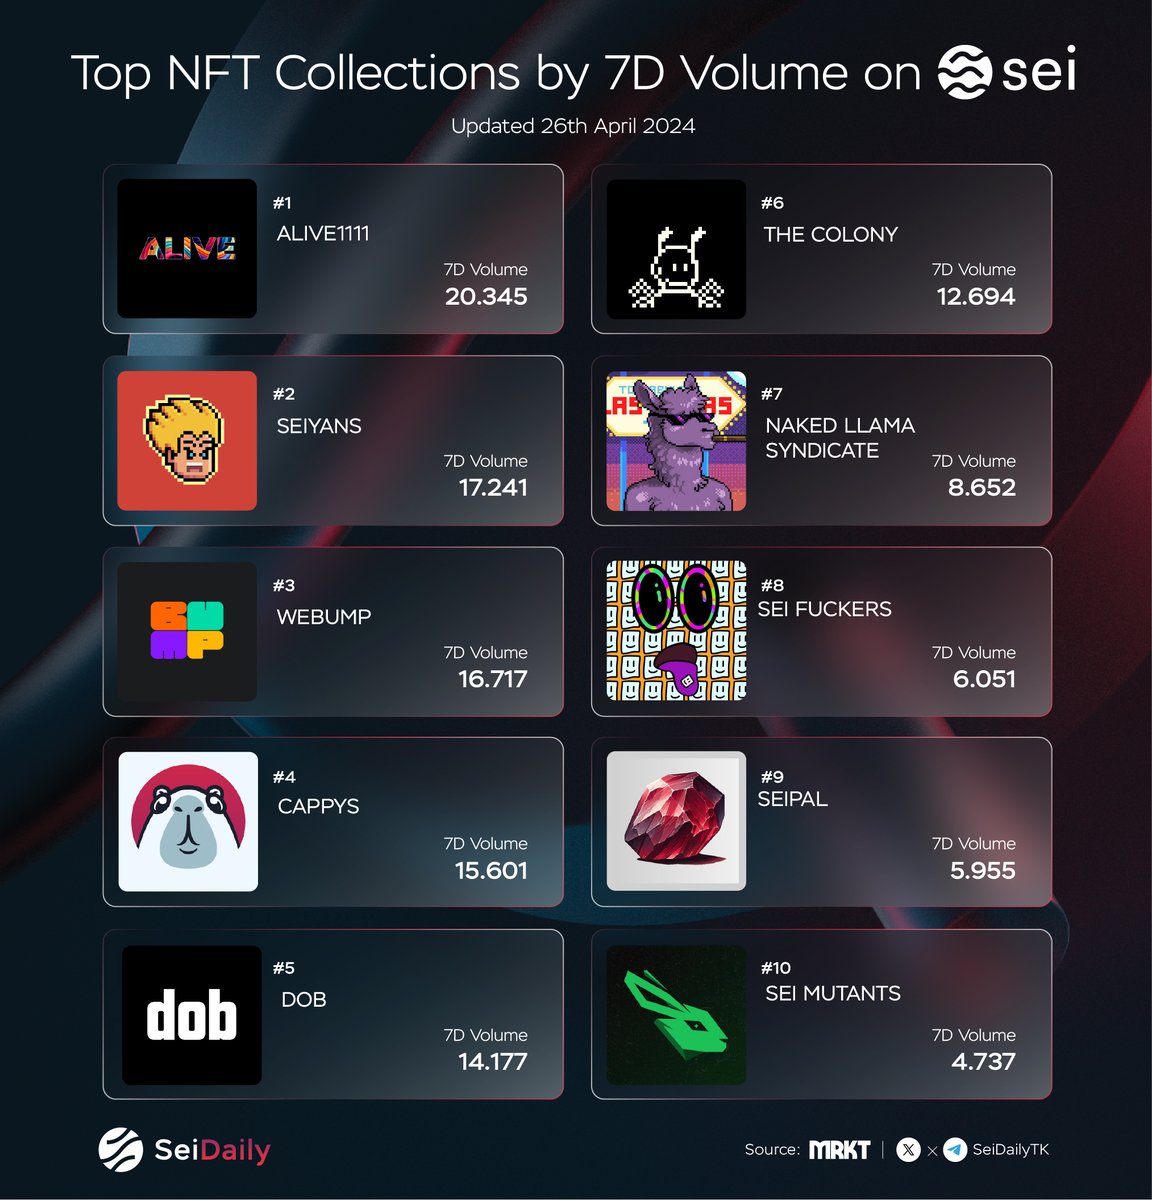 Top NFT Collections by 7D Volume on Sei🔴💨 🥇@ALIVE1111nfts 🥈@seiyansnft 🥉@webump_ @dobnfts @TheColonyNFT__ @llamasyndicate @SeiFuckers @Seipalnft @SeiMutants